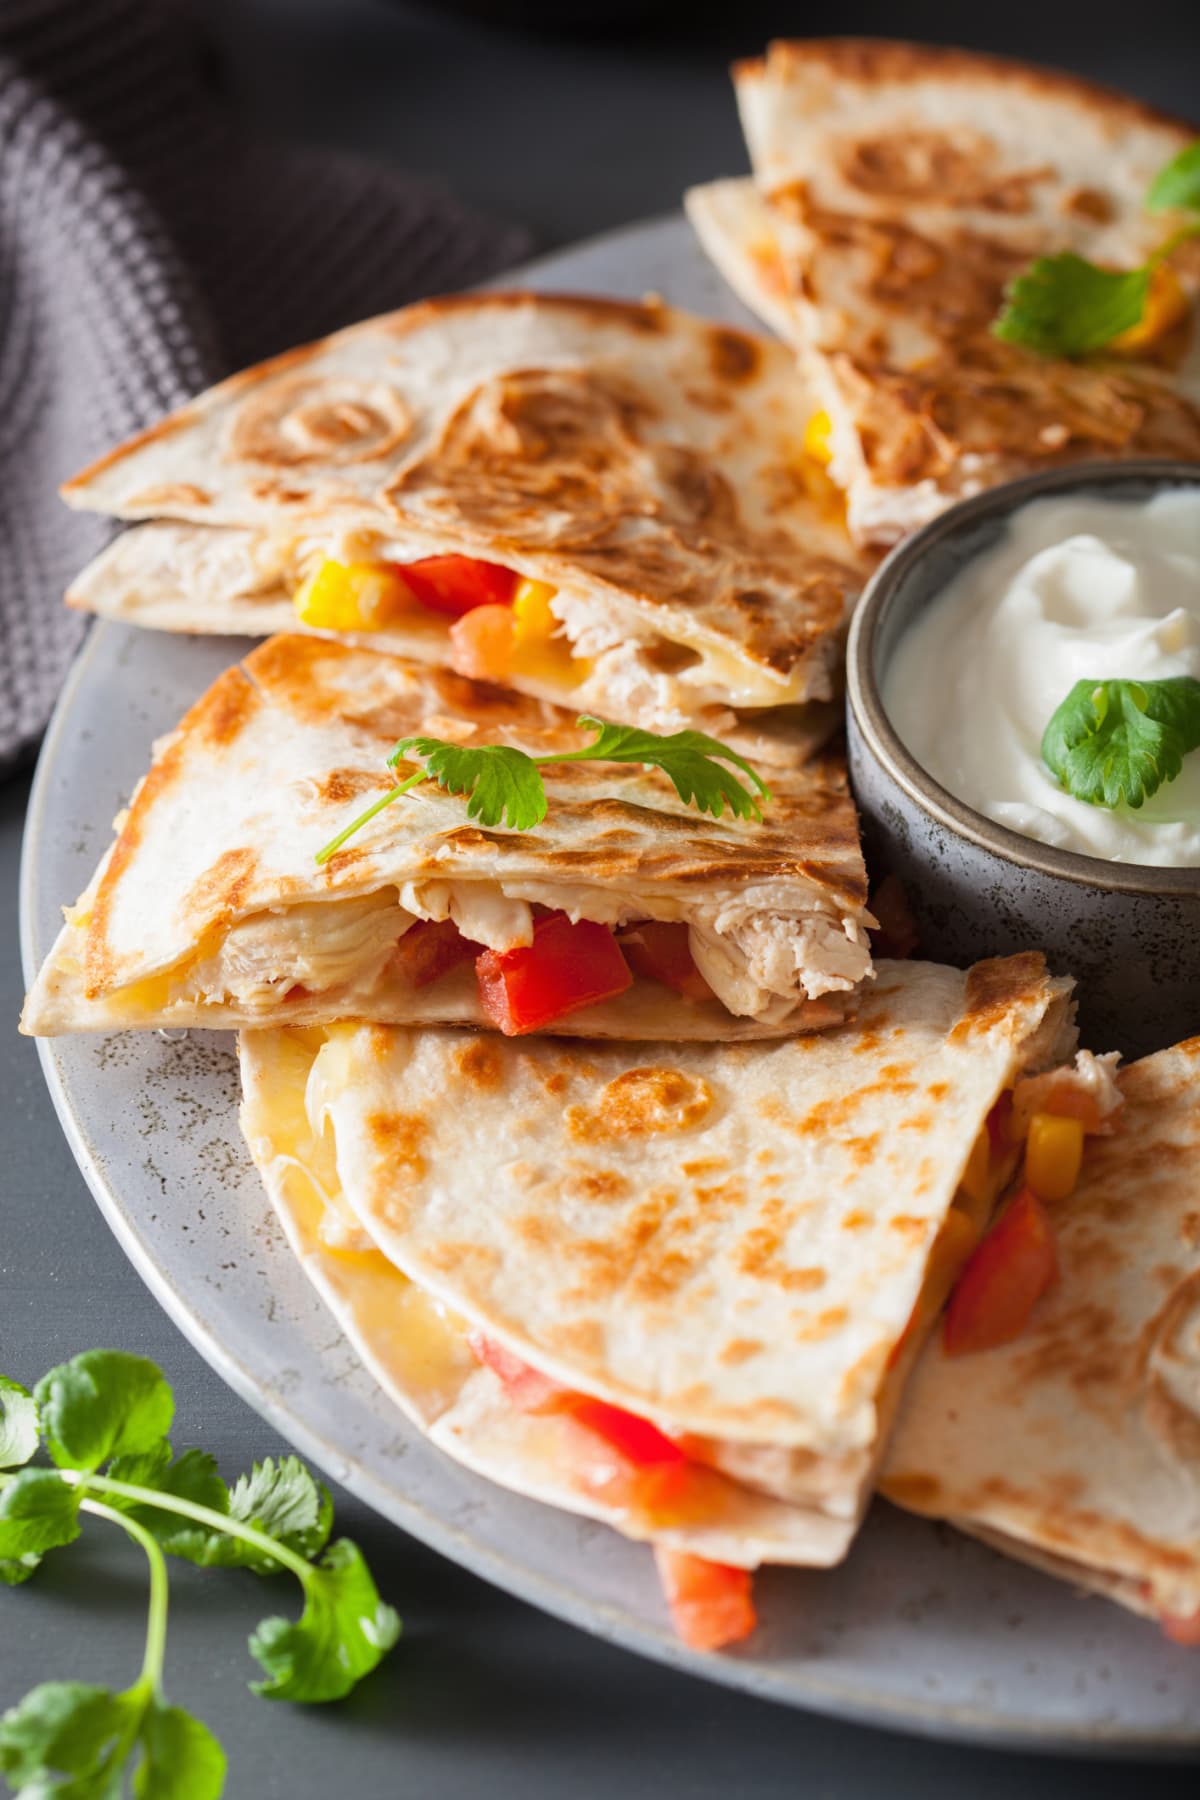 Mexican quesadilla with chicken, tomato, sweet corn, cheese, and sour cream